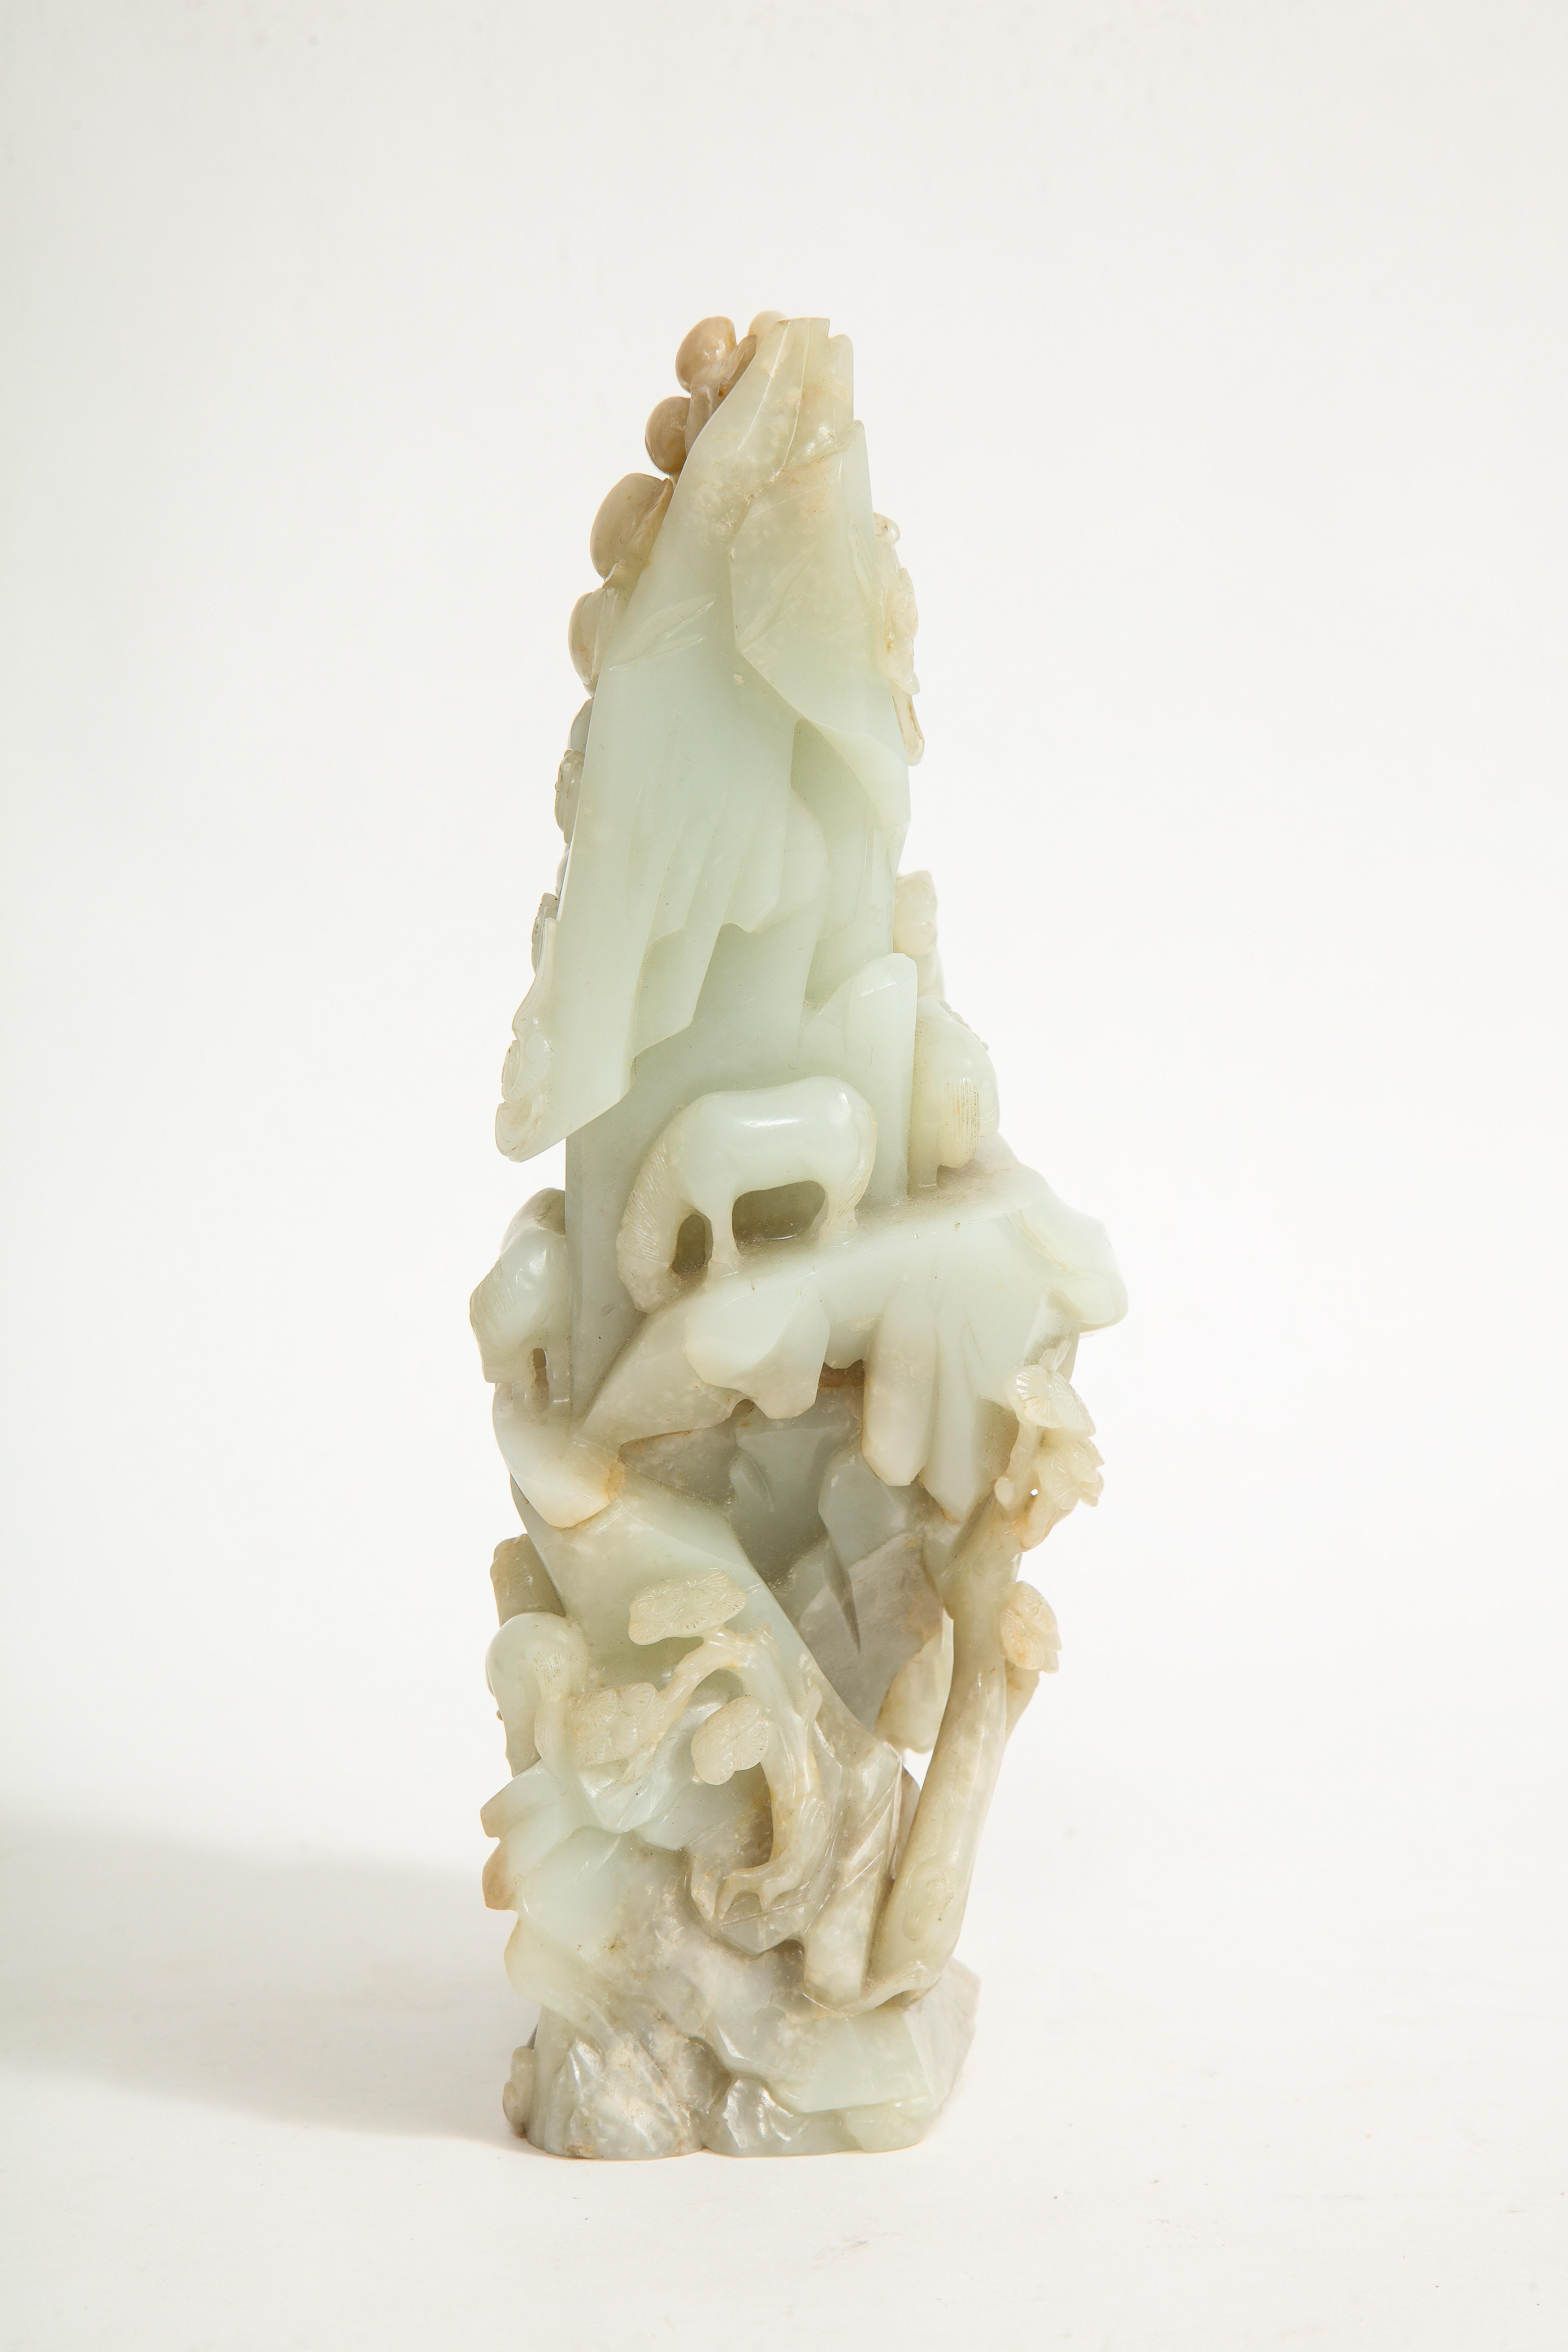 Large 18th/19th C. Chinese Pale Celadon Jade High Relief Hand-Carved Mountain 2